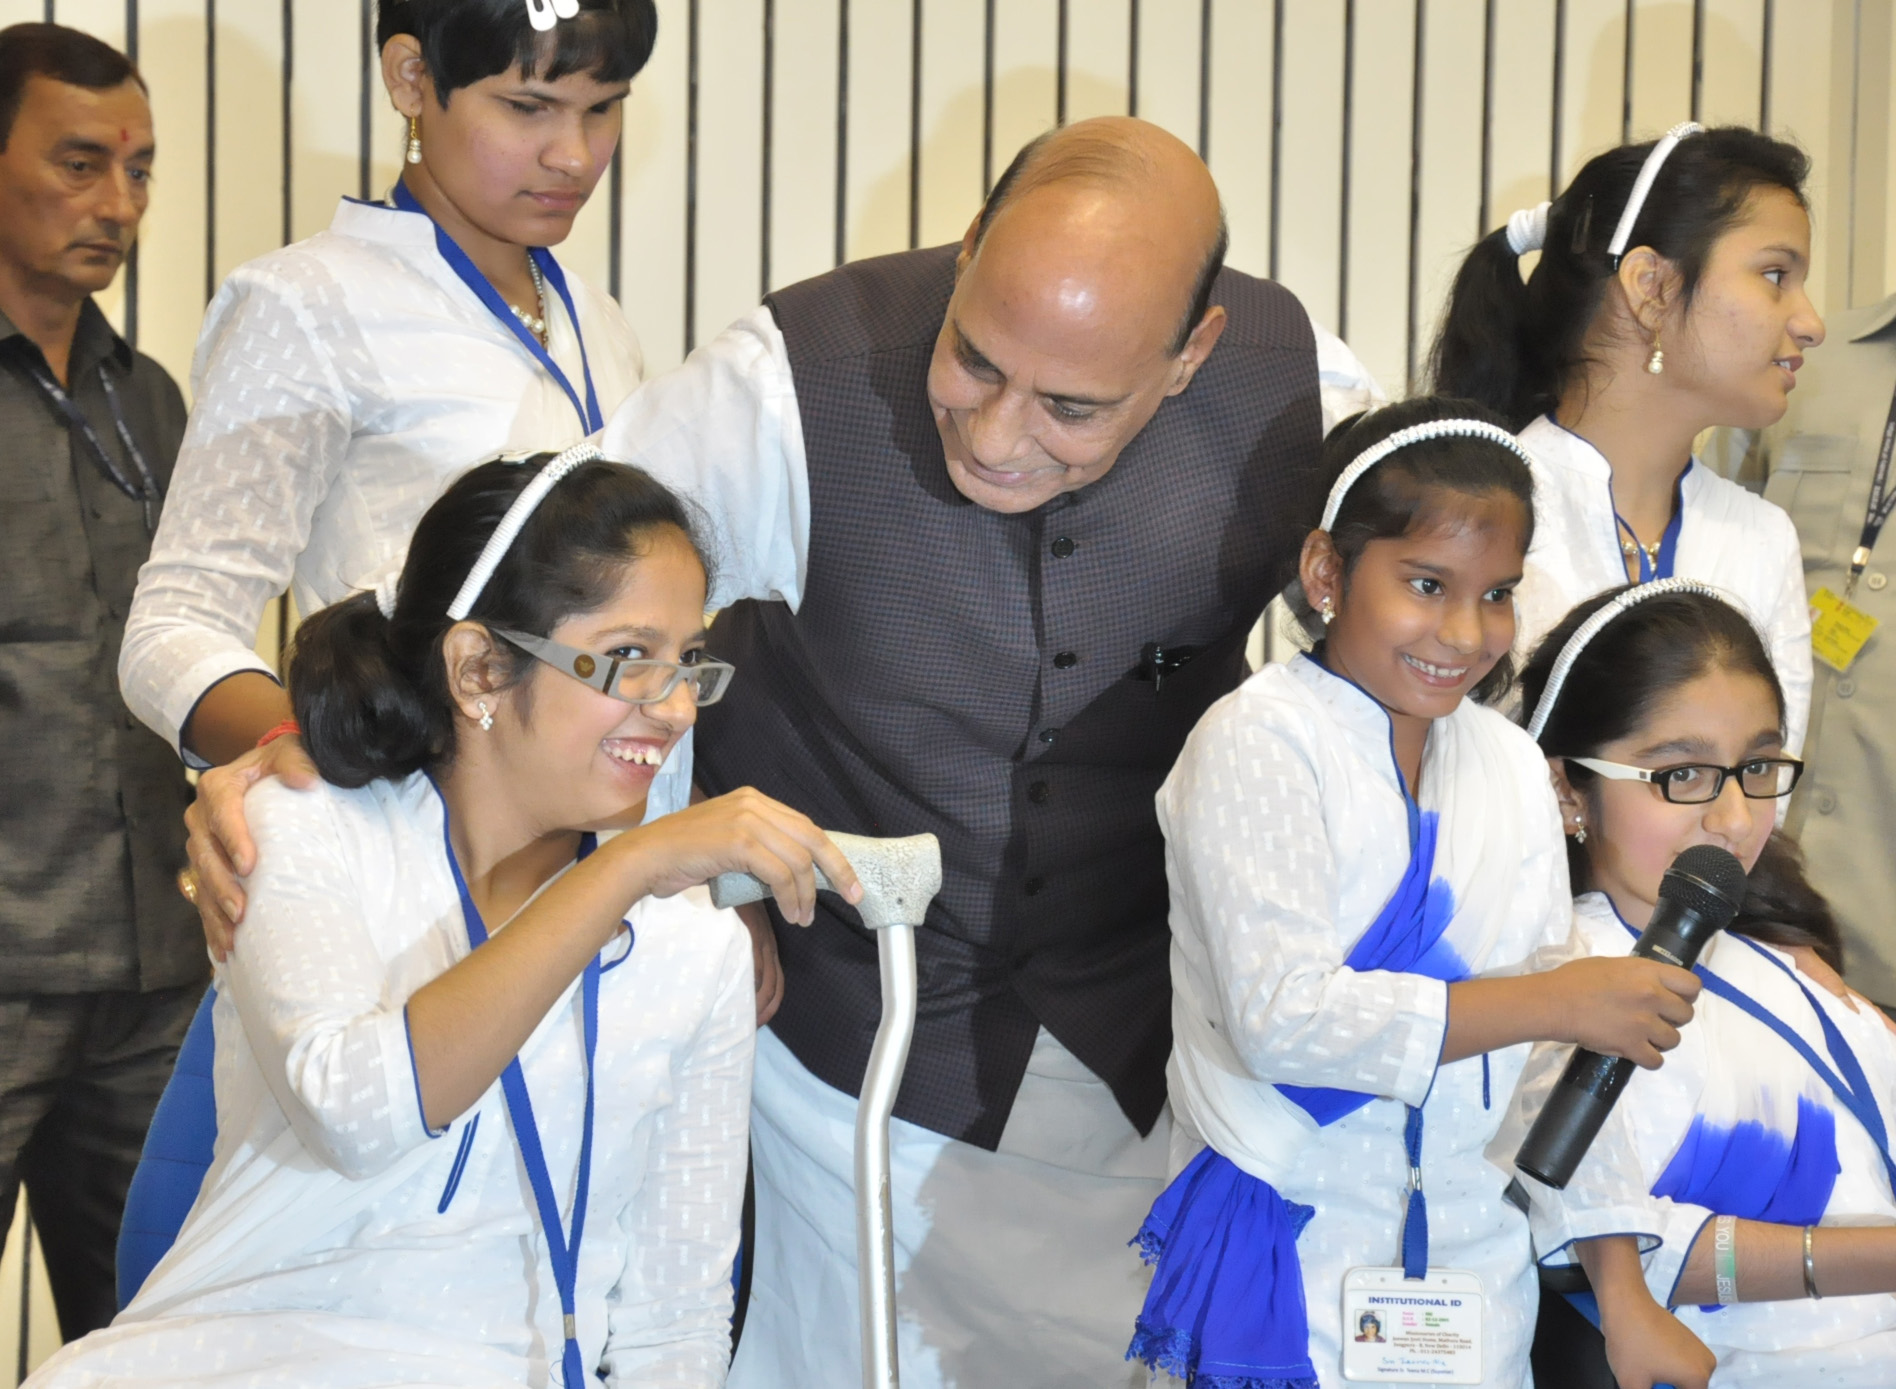 The Union Home Minister, Shri Rajnath Singh sharing a lighter moment with the differently-abled children, at the celebration to commemorate the Canonization of Saint Mother Teresa, in New Delhi on October 19, 2016.